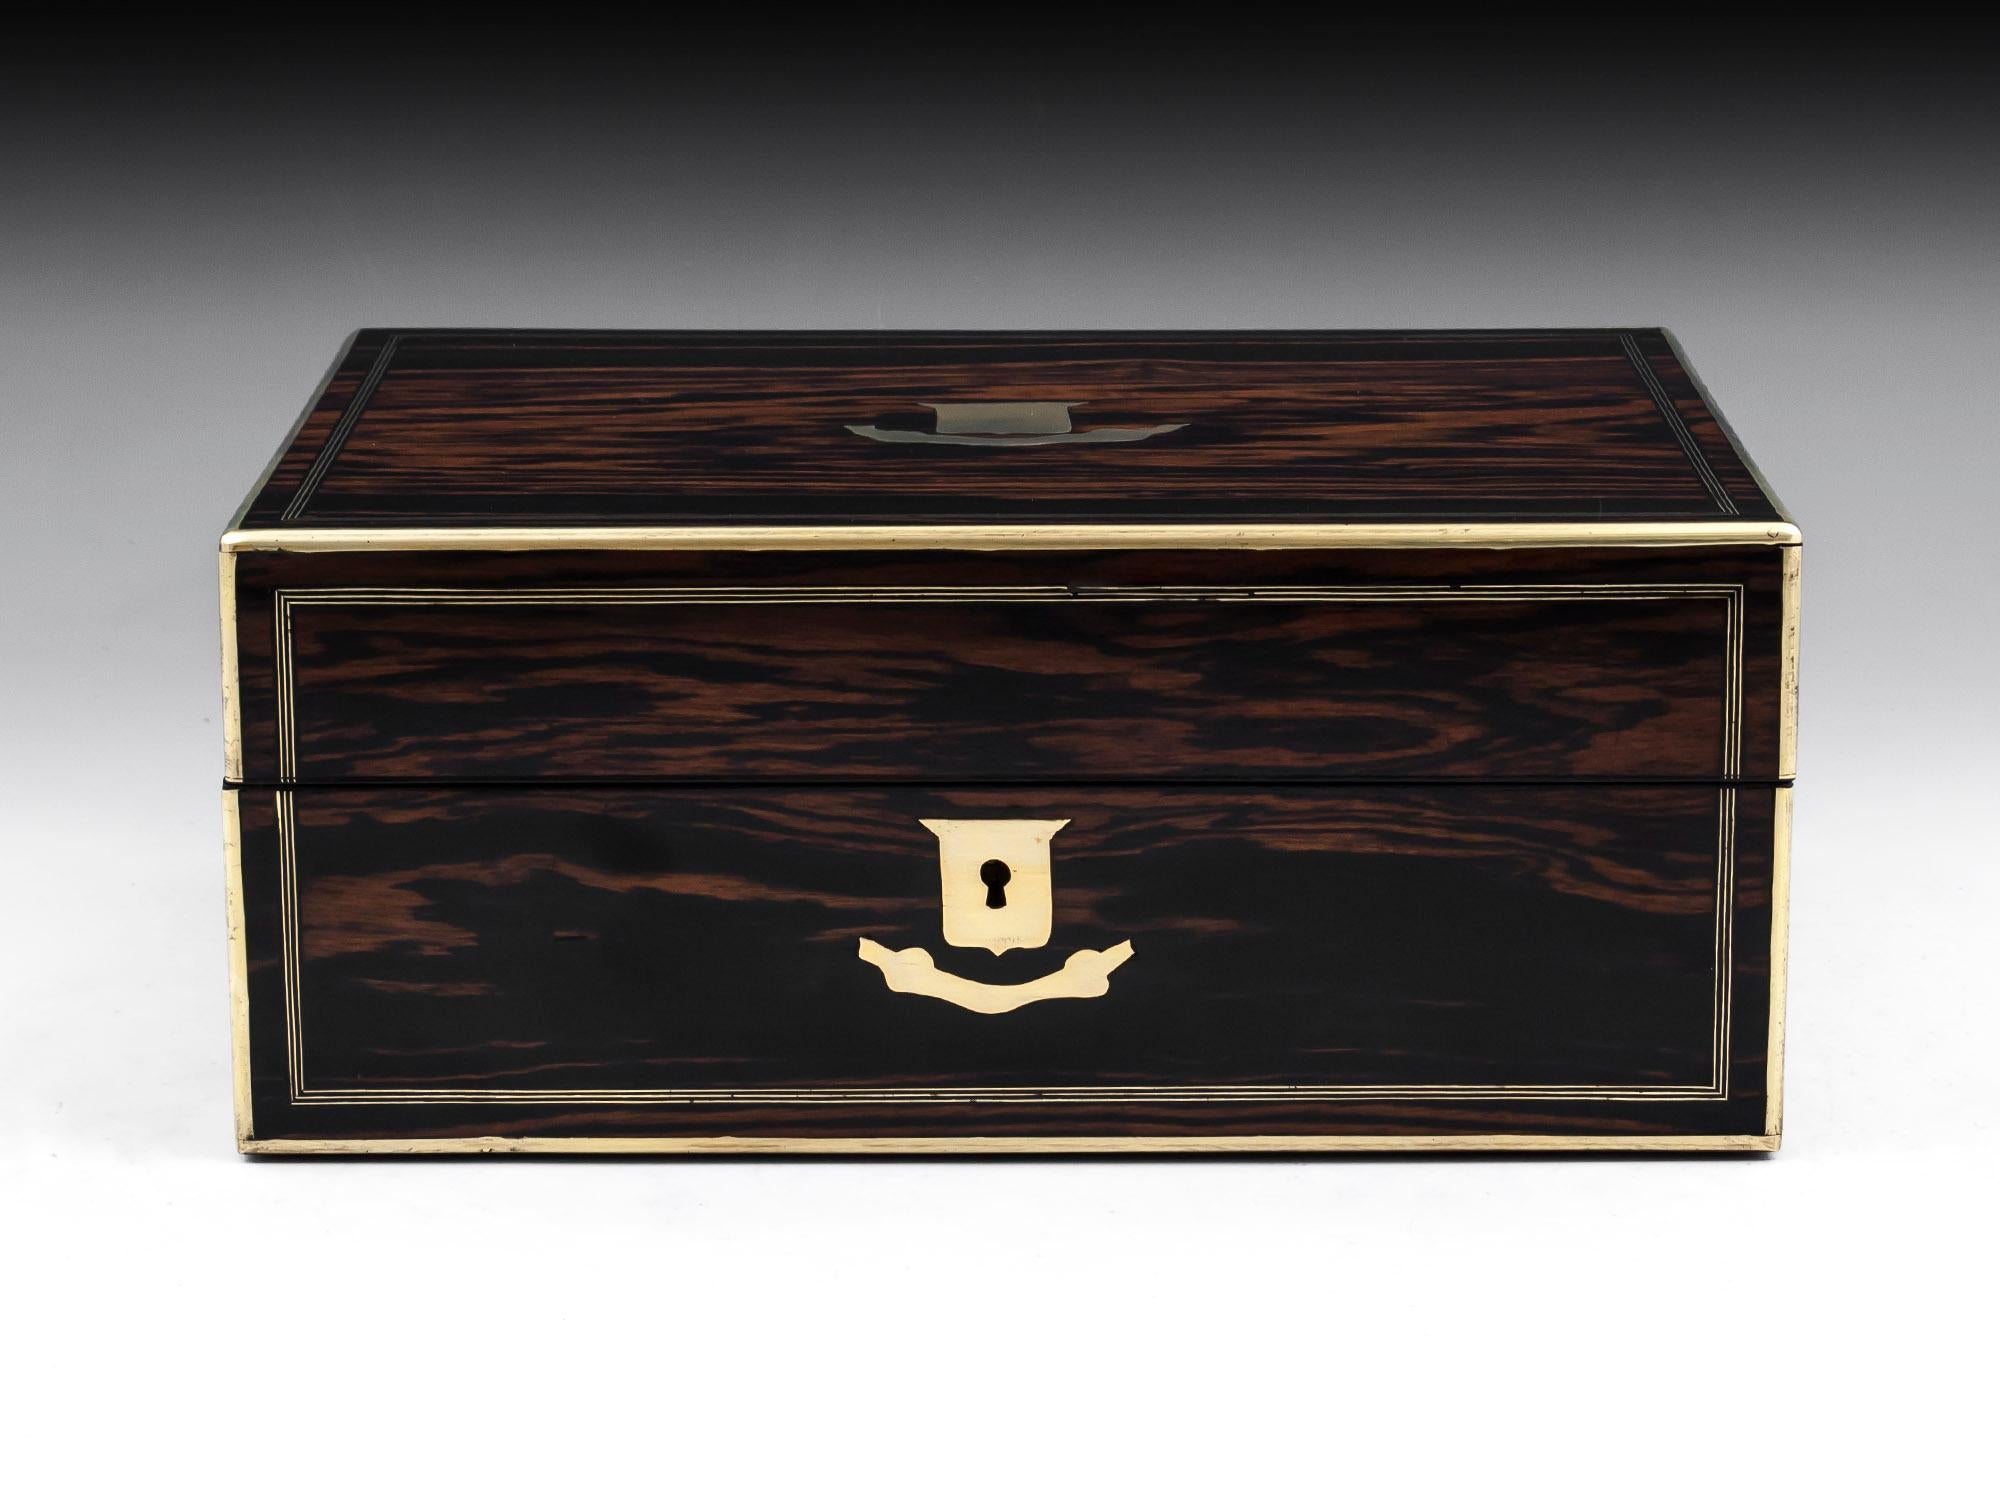 Jewelry box veneered in exotic figured Coromandel with brass quadrant edging and triple stringing on the front and top. With a brass shield escutcheon and matching vacant initial plate. 

The interior of this antique jewelry box is lined in red